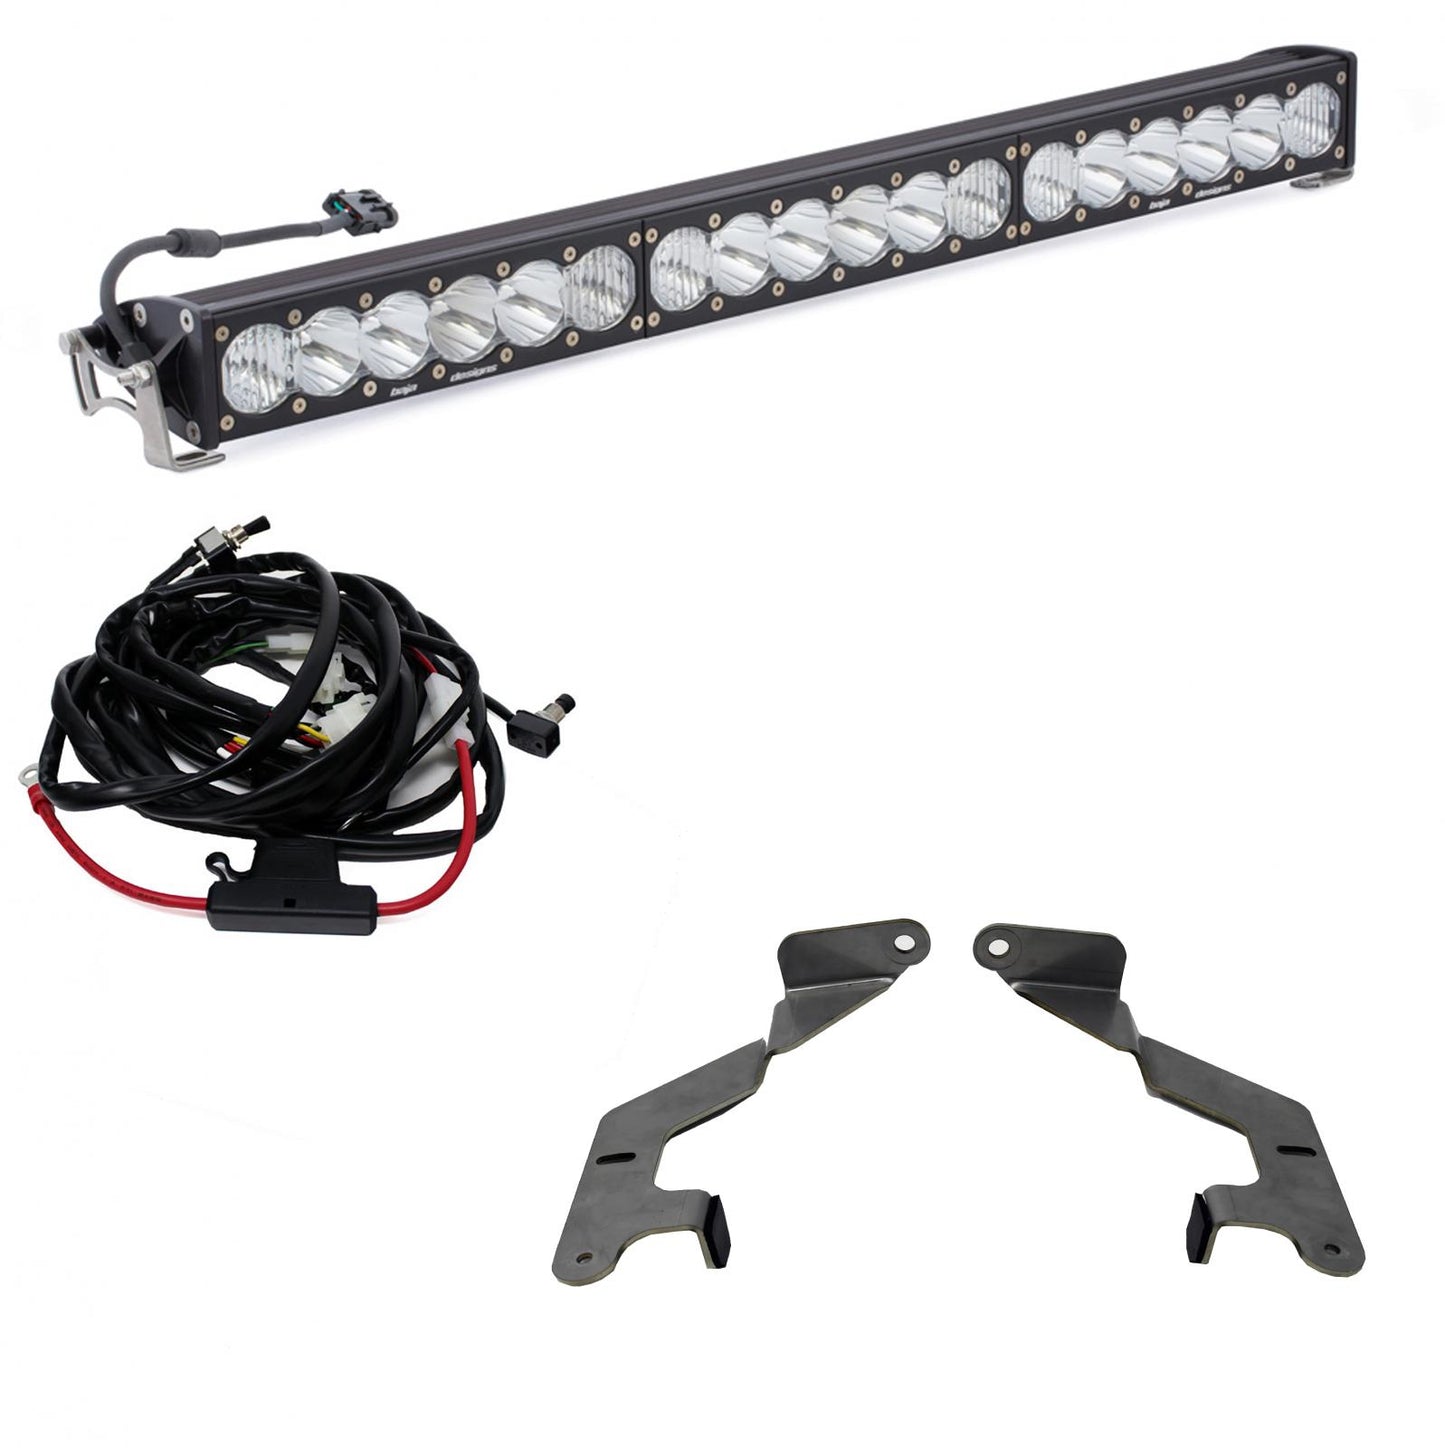 All components of  Baja Designs Toyota OnX6+ 30 Inch Grille Lower Light Kit - 2014-21 Tundra